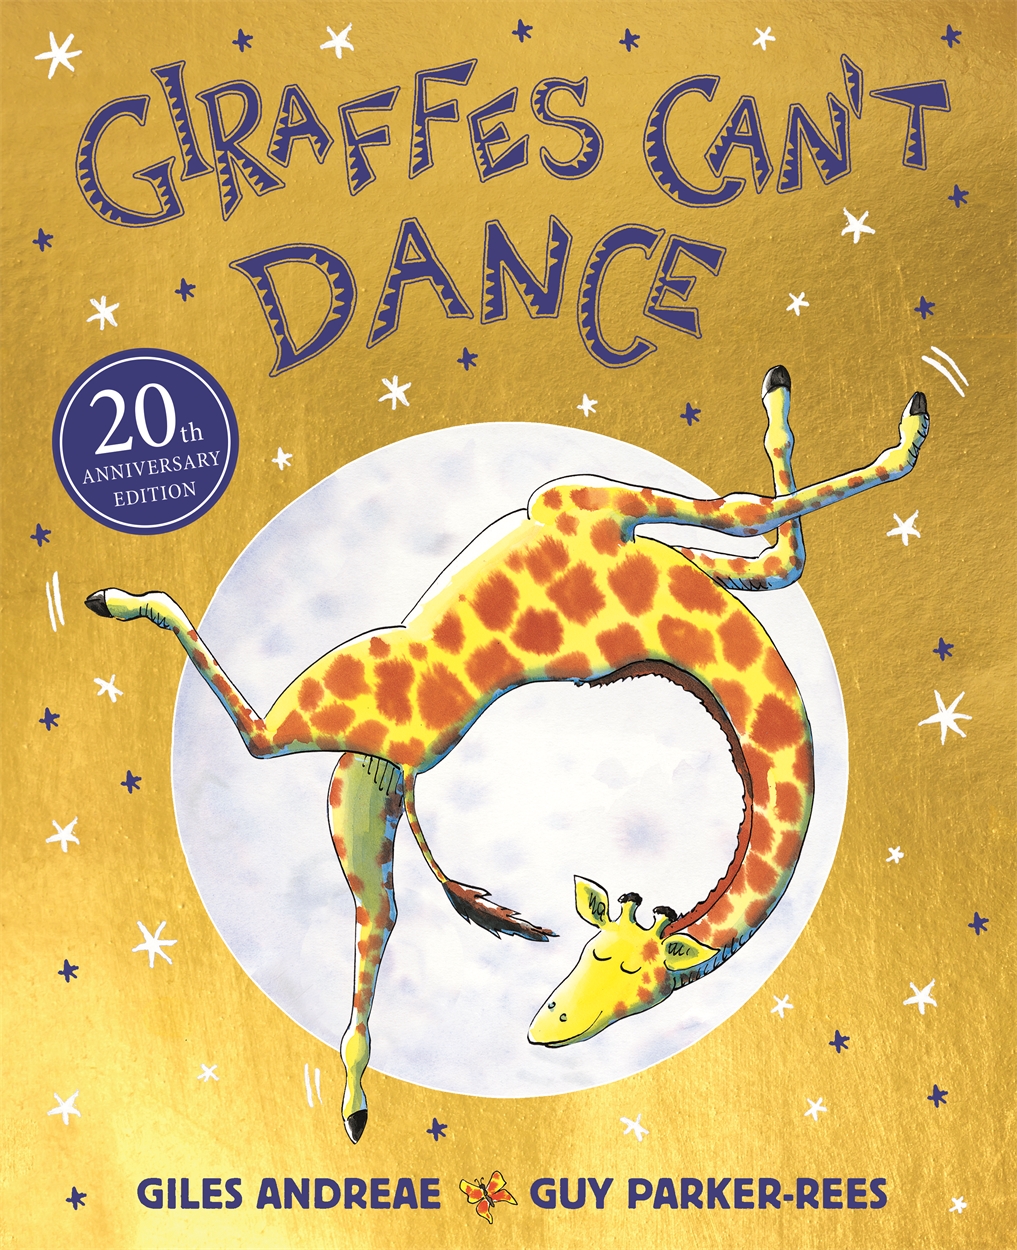 Giraffes Can't Dance 20th Anniversary Edition by Guy Parker-Rees | Hachette  UK